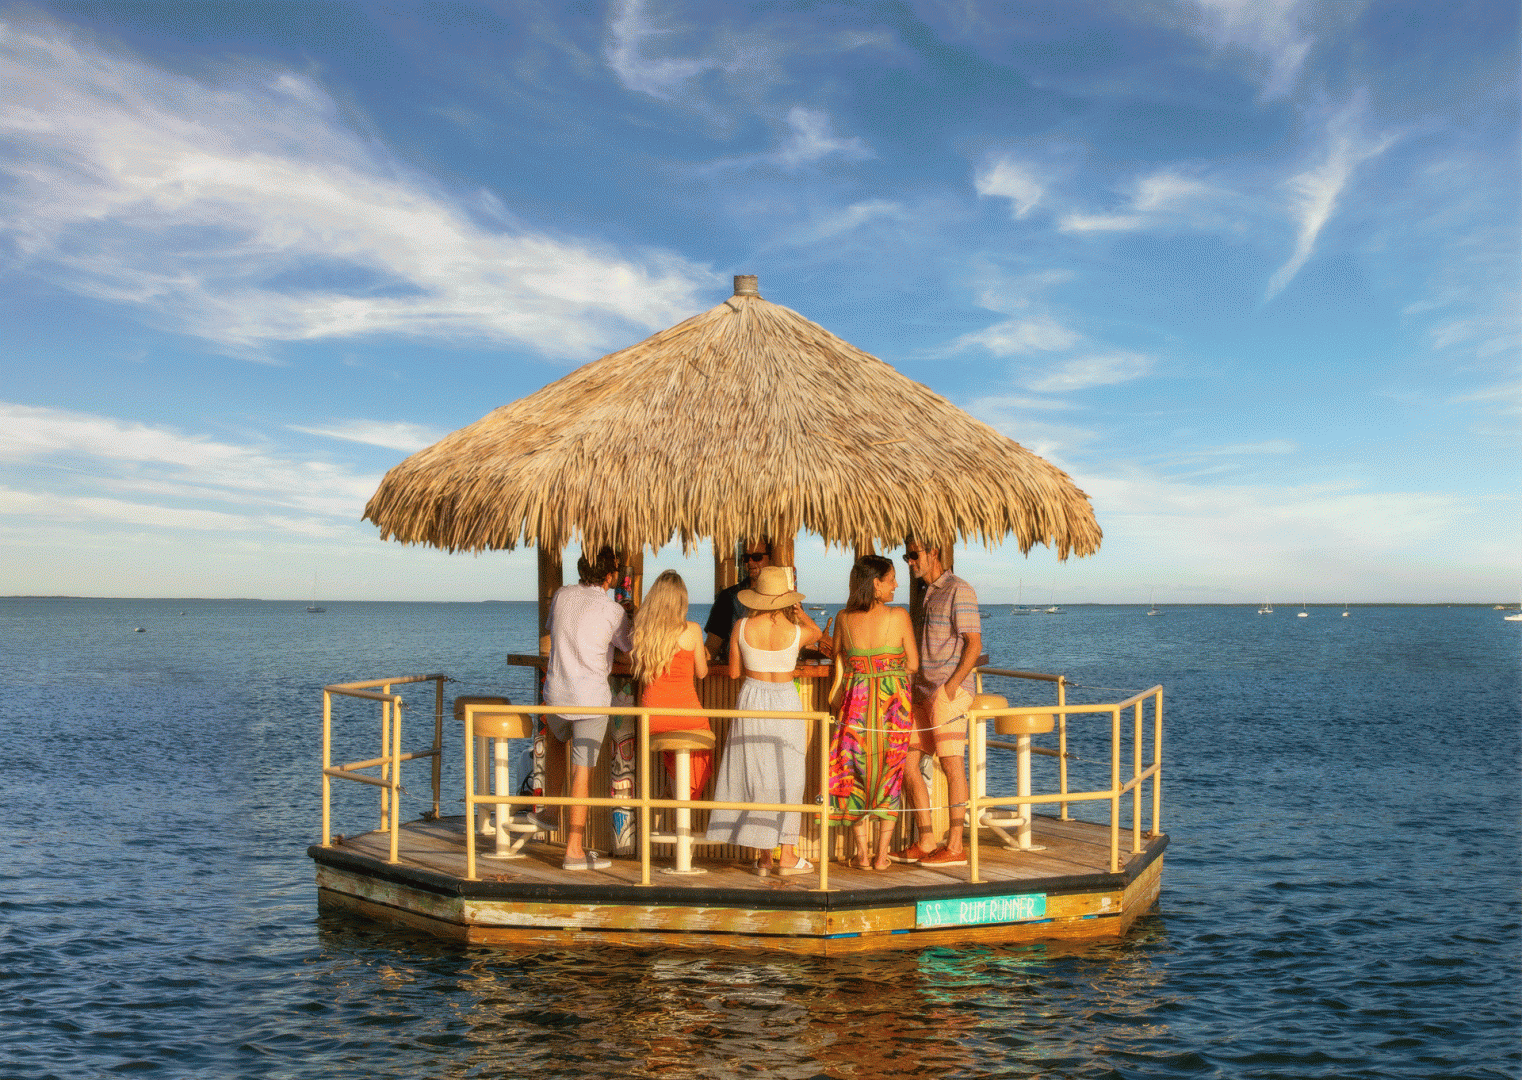 Tiki Boat Adventures: Discovering Tropical Fun on the Water